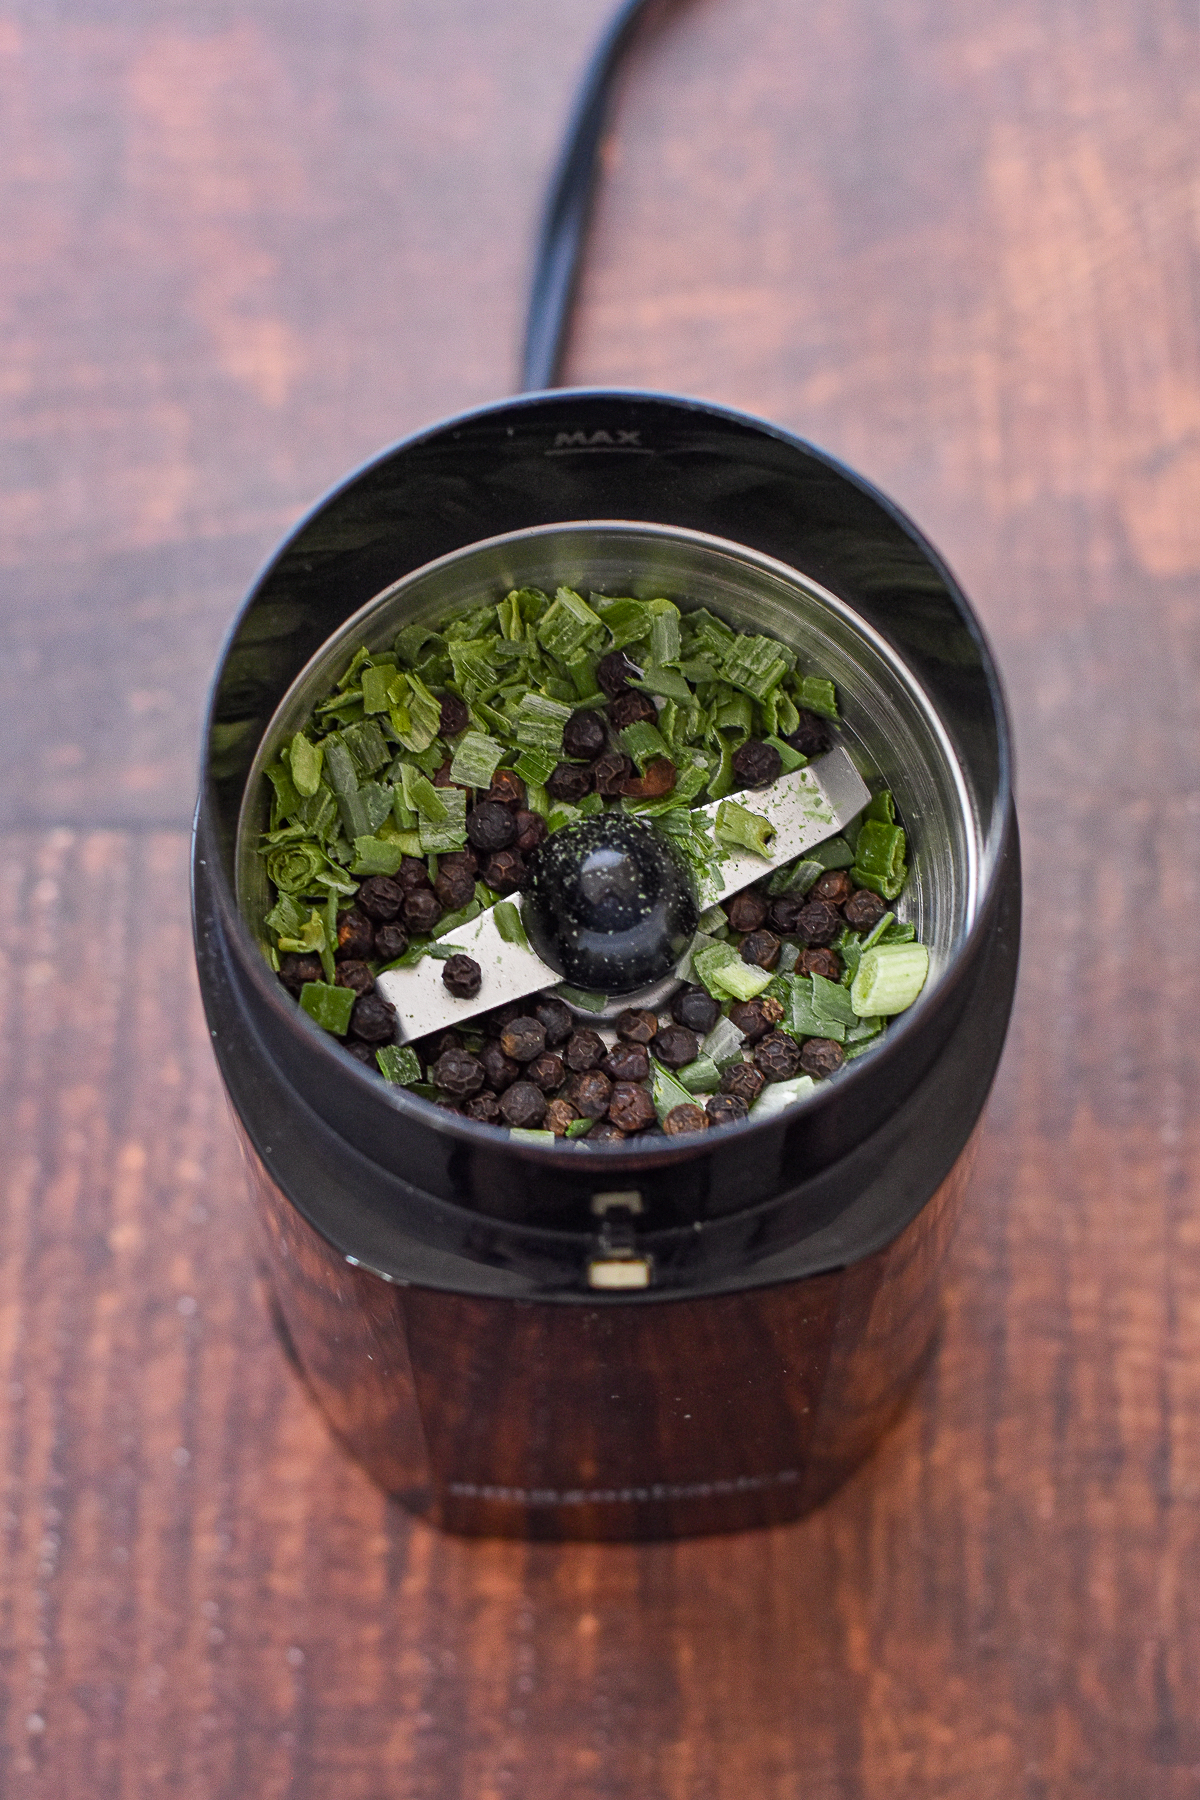 process shot of dried chives and whole peppercorns in an electric spice grinder prior to grinding